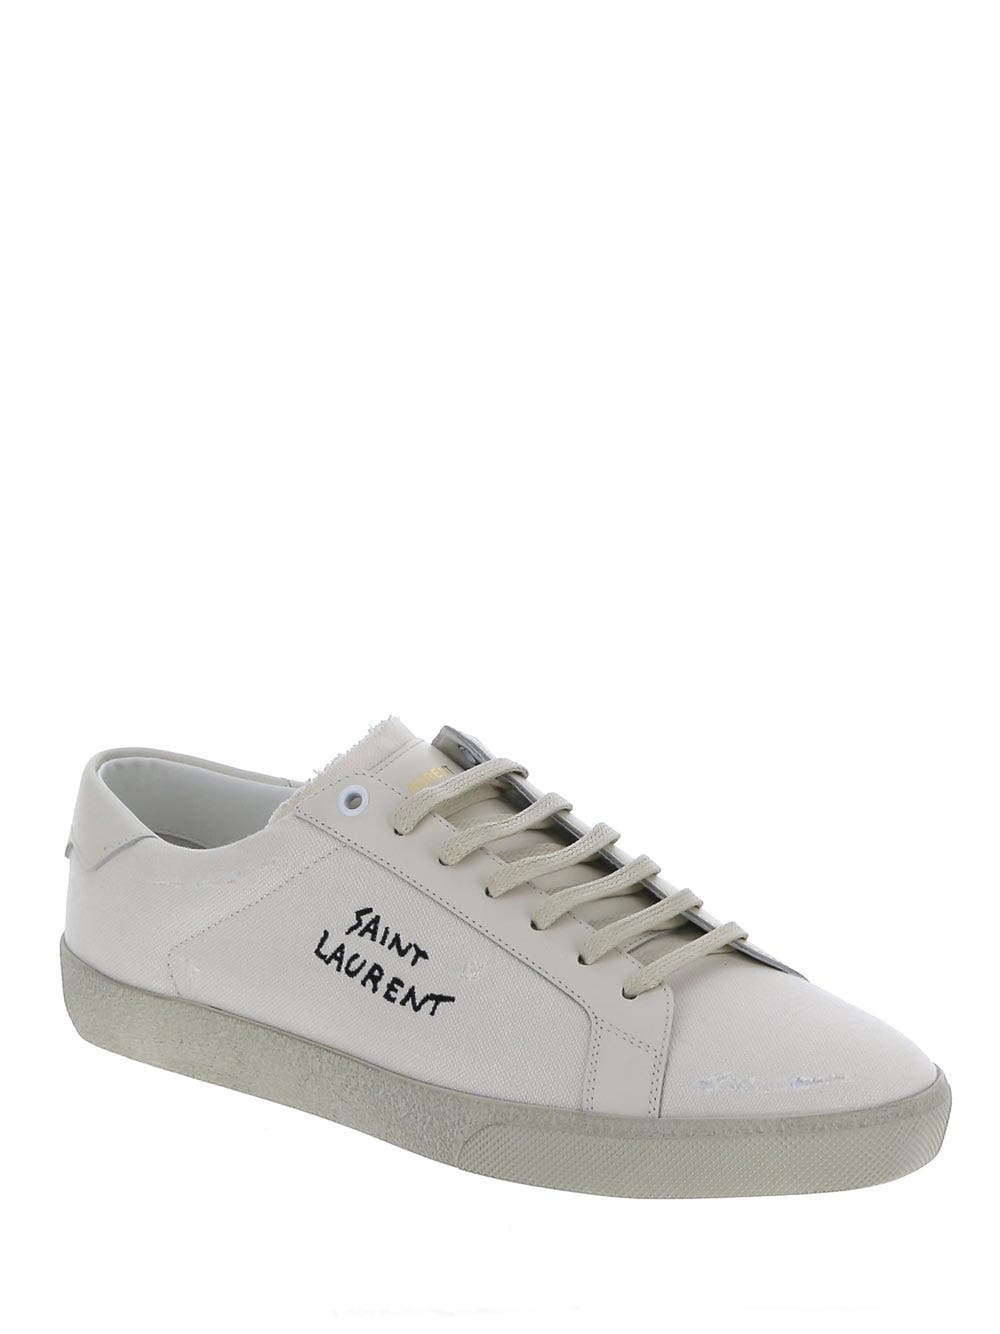 Court Classic SL/06 Embroidered Sneakers - 2